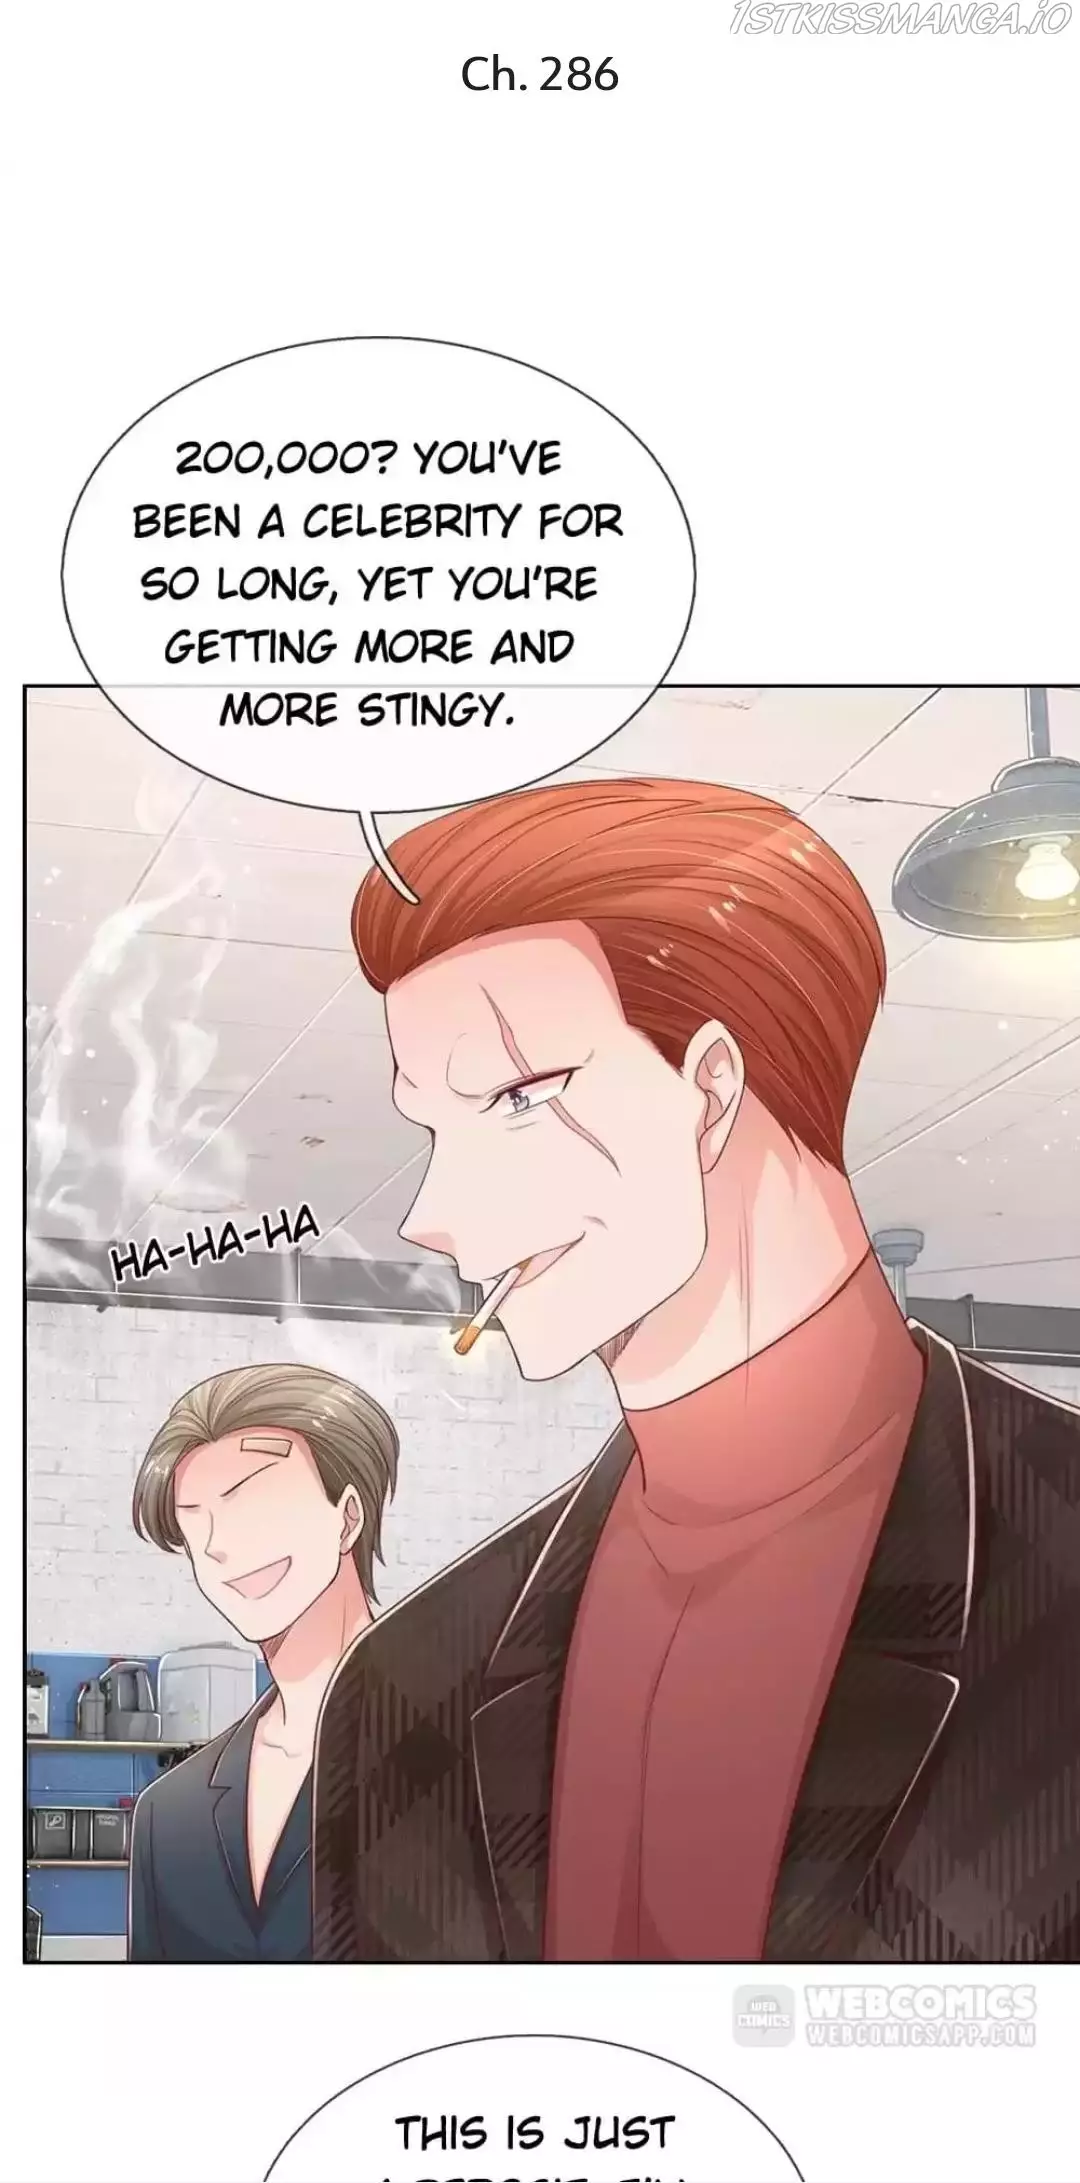 Sweet Escape (Manhua) - 286 page 1